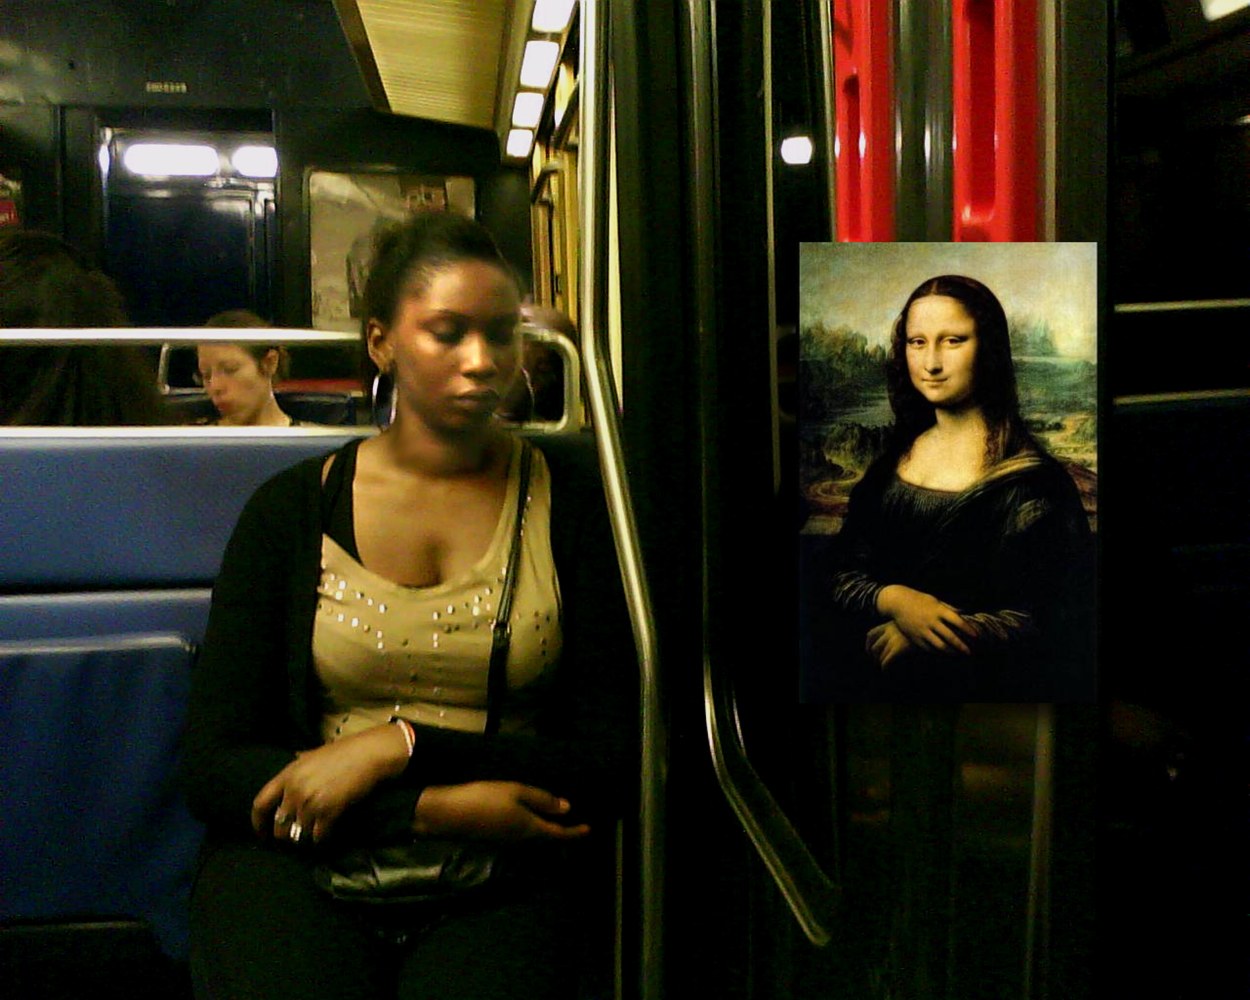 Chris Marker
PASSENGERS Untitled #201, 2011
color photograph mounted on white Sintra
25 x 31 1/2 inches (63.5 x 80.0 cm)
edition of 3

&amp;nbsp;